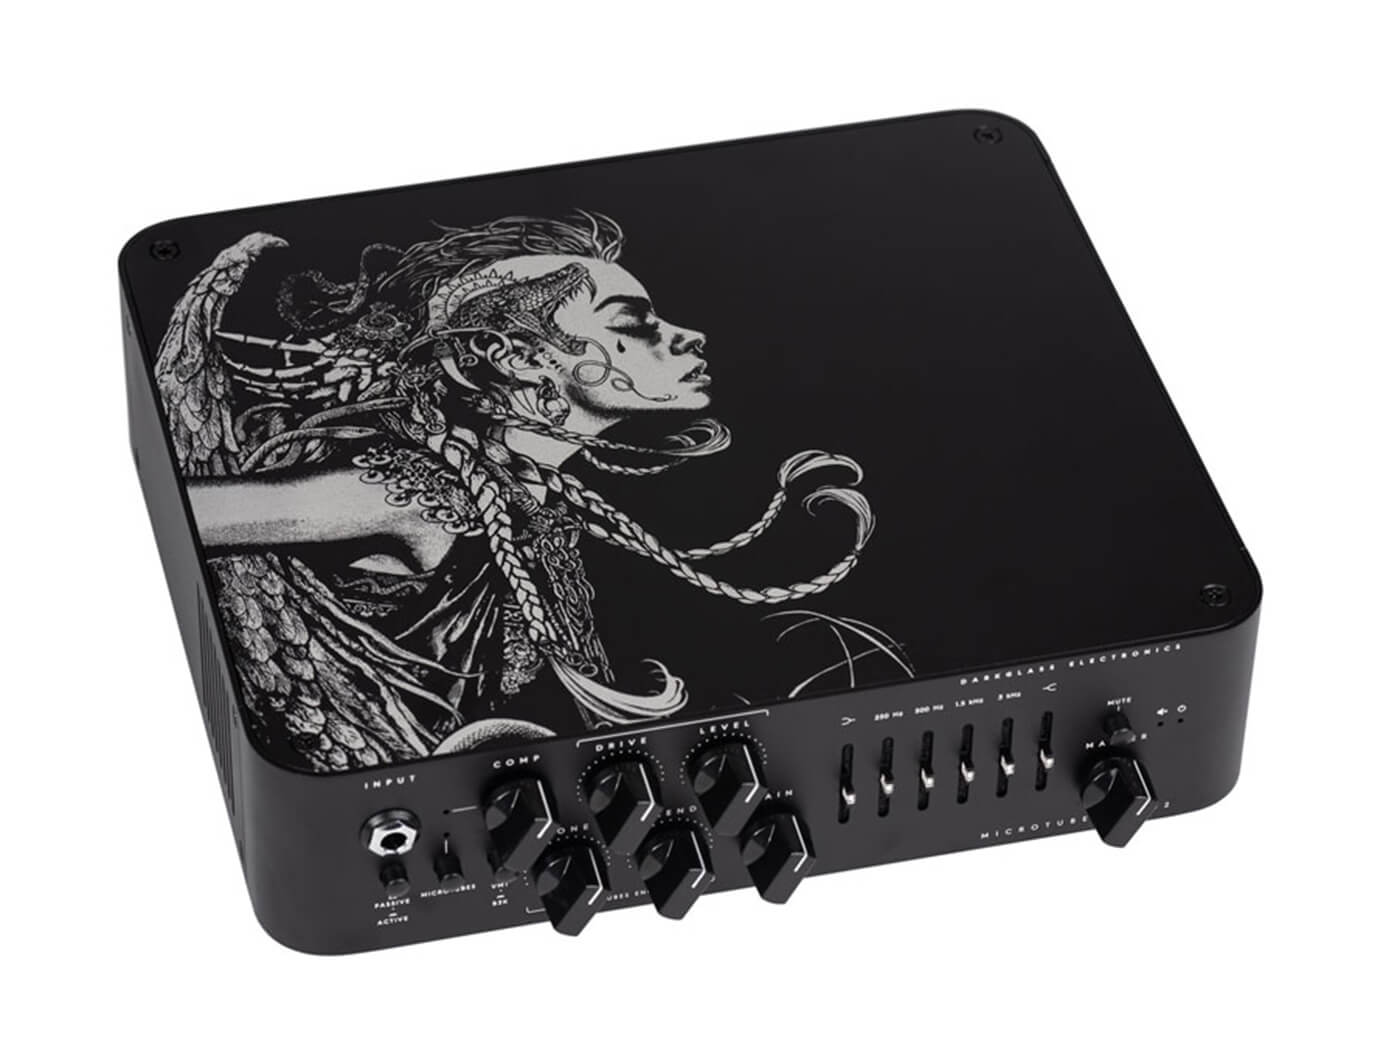 Darkglass Electronics 900 V2 limited-edition